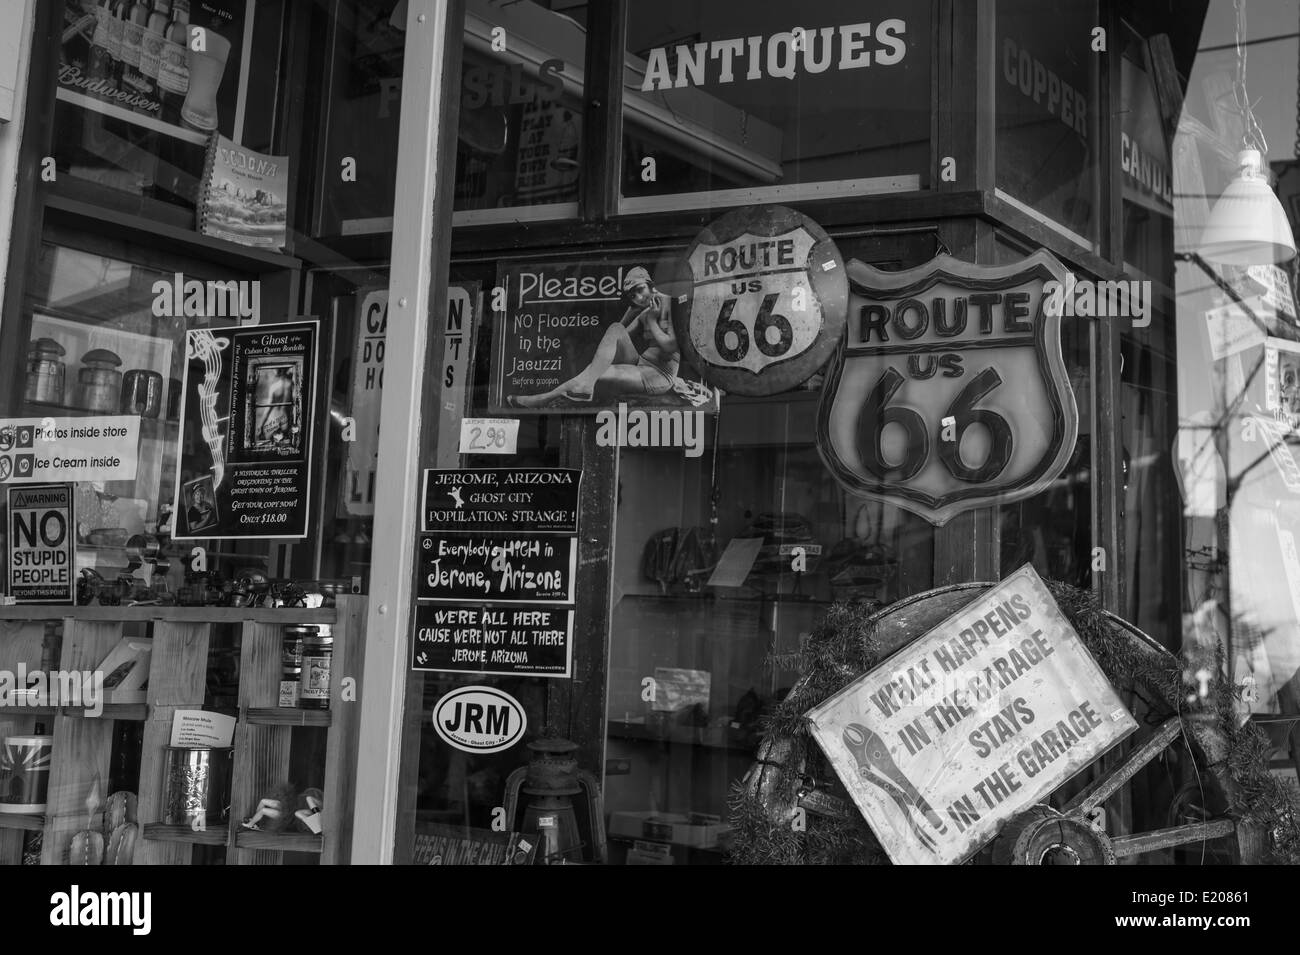 Route 66 Antique and Novelty Shop Stock Photo